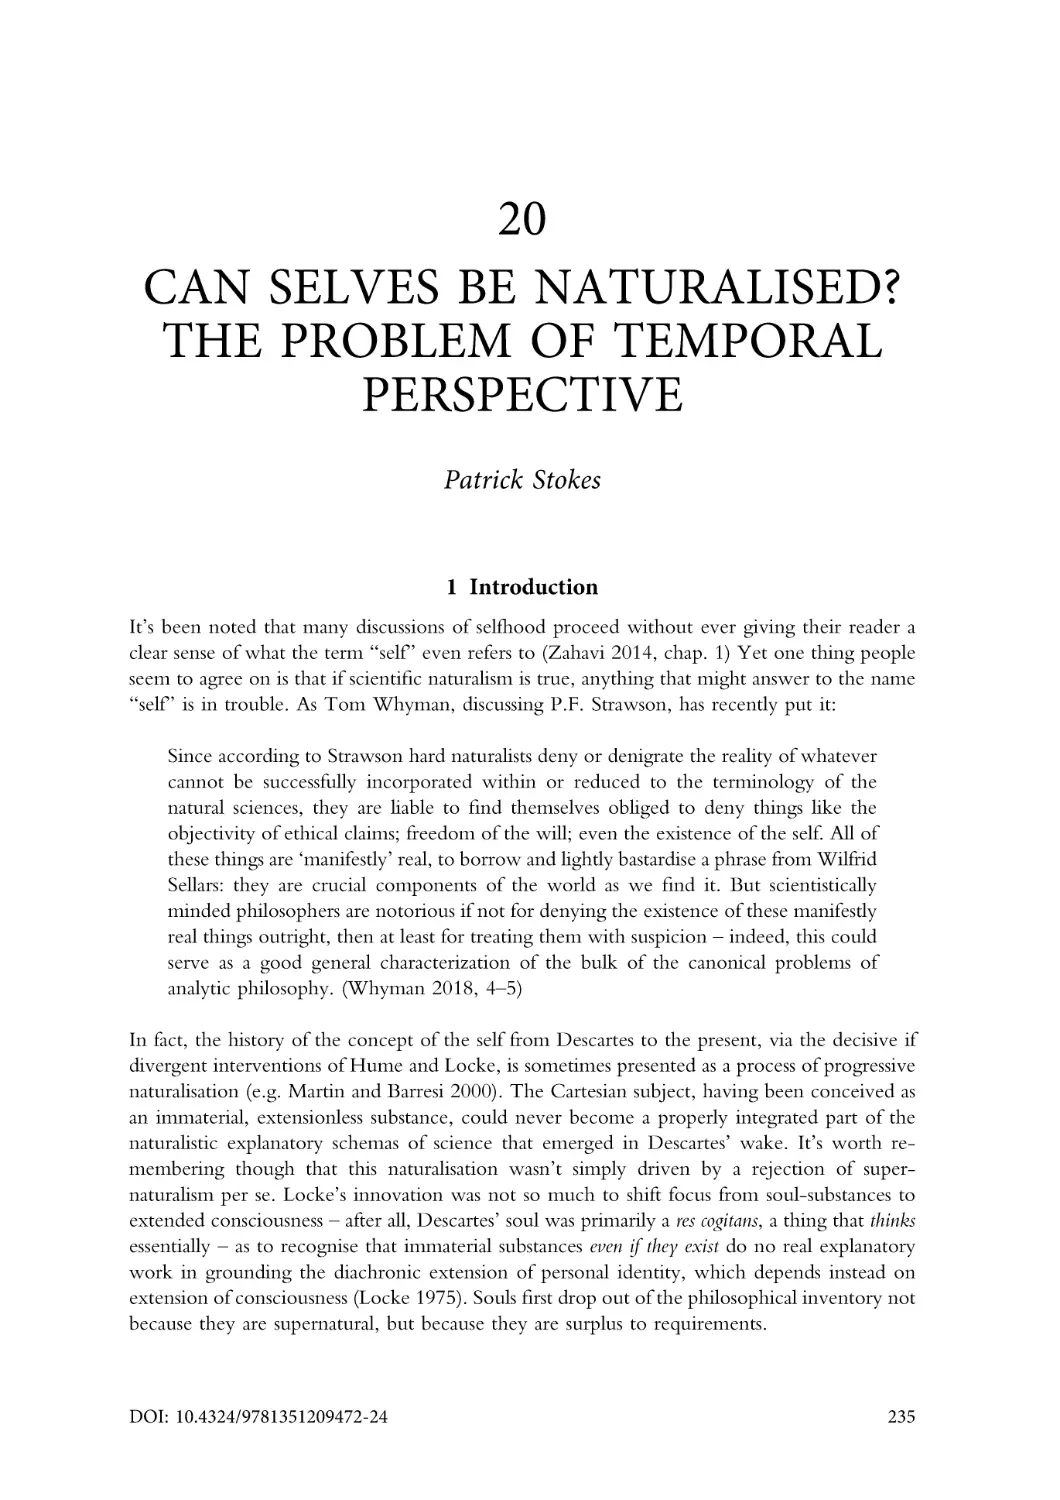 20. Can selves be naturalised? The problem of temporal perspective
1. Introduction